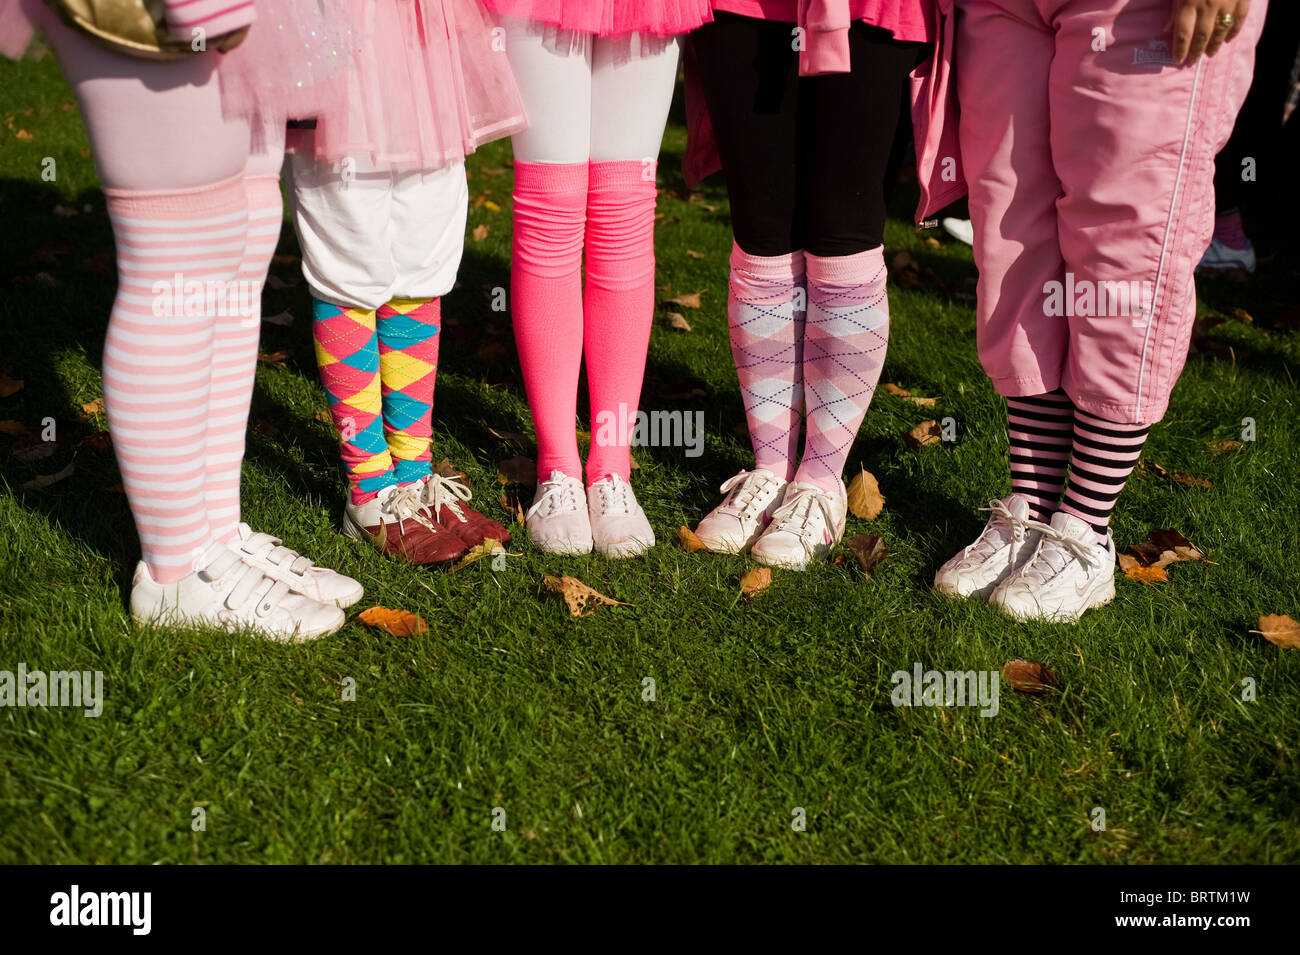 Colourful costume worn by participants in the Thorndon Stride event supporting Cancer Research UK. Stock Photo